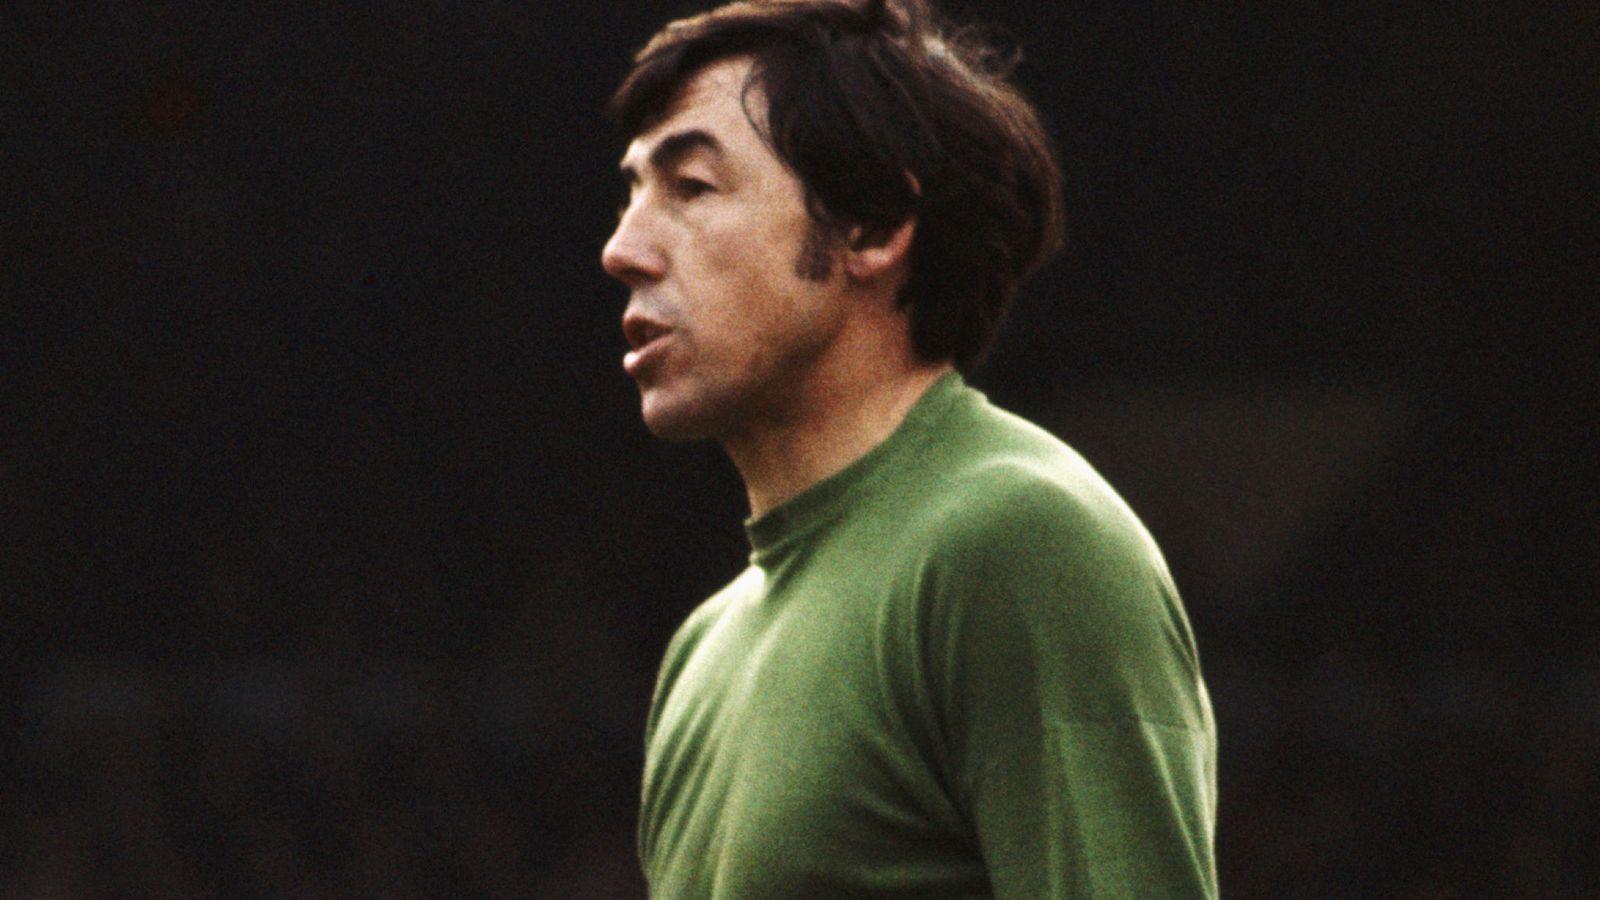 Gordon Banks was a real competitor who lived and breathed football